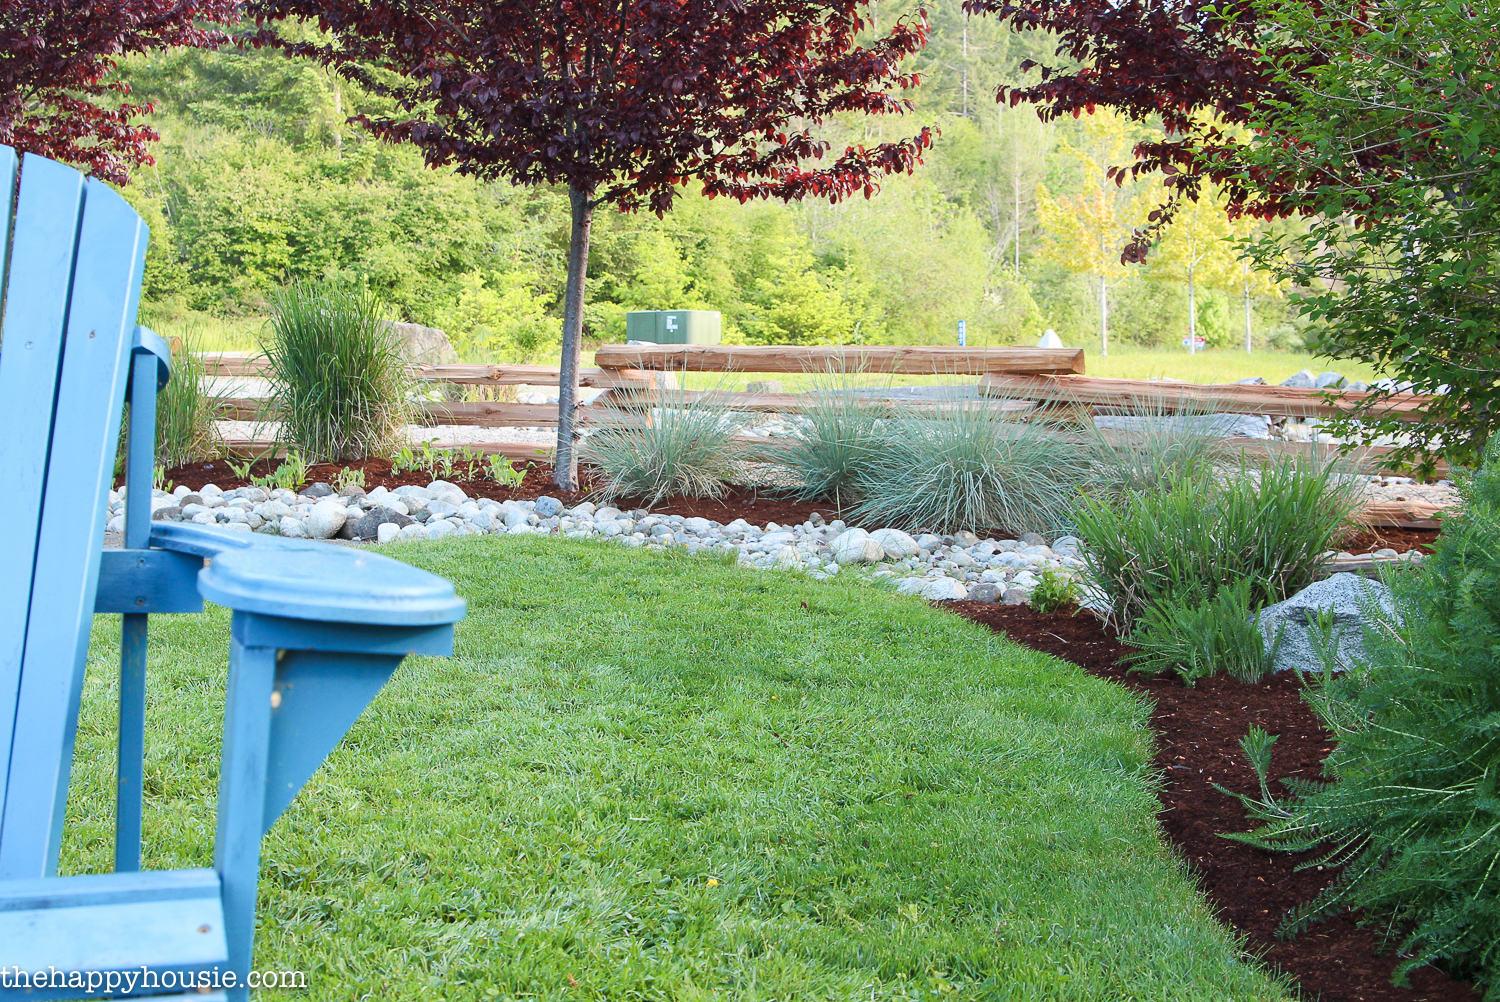 A front yard landscaped with river rock and garden beds.